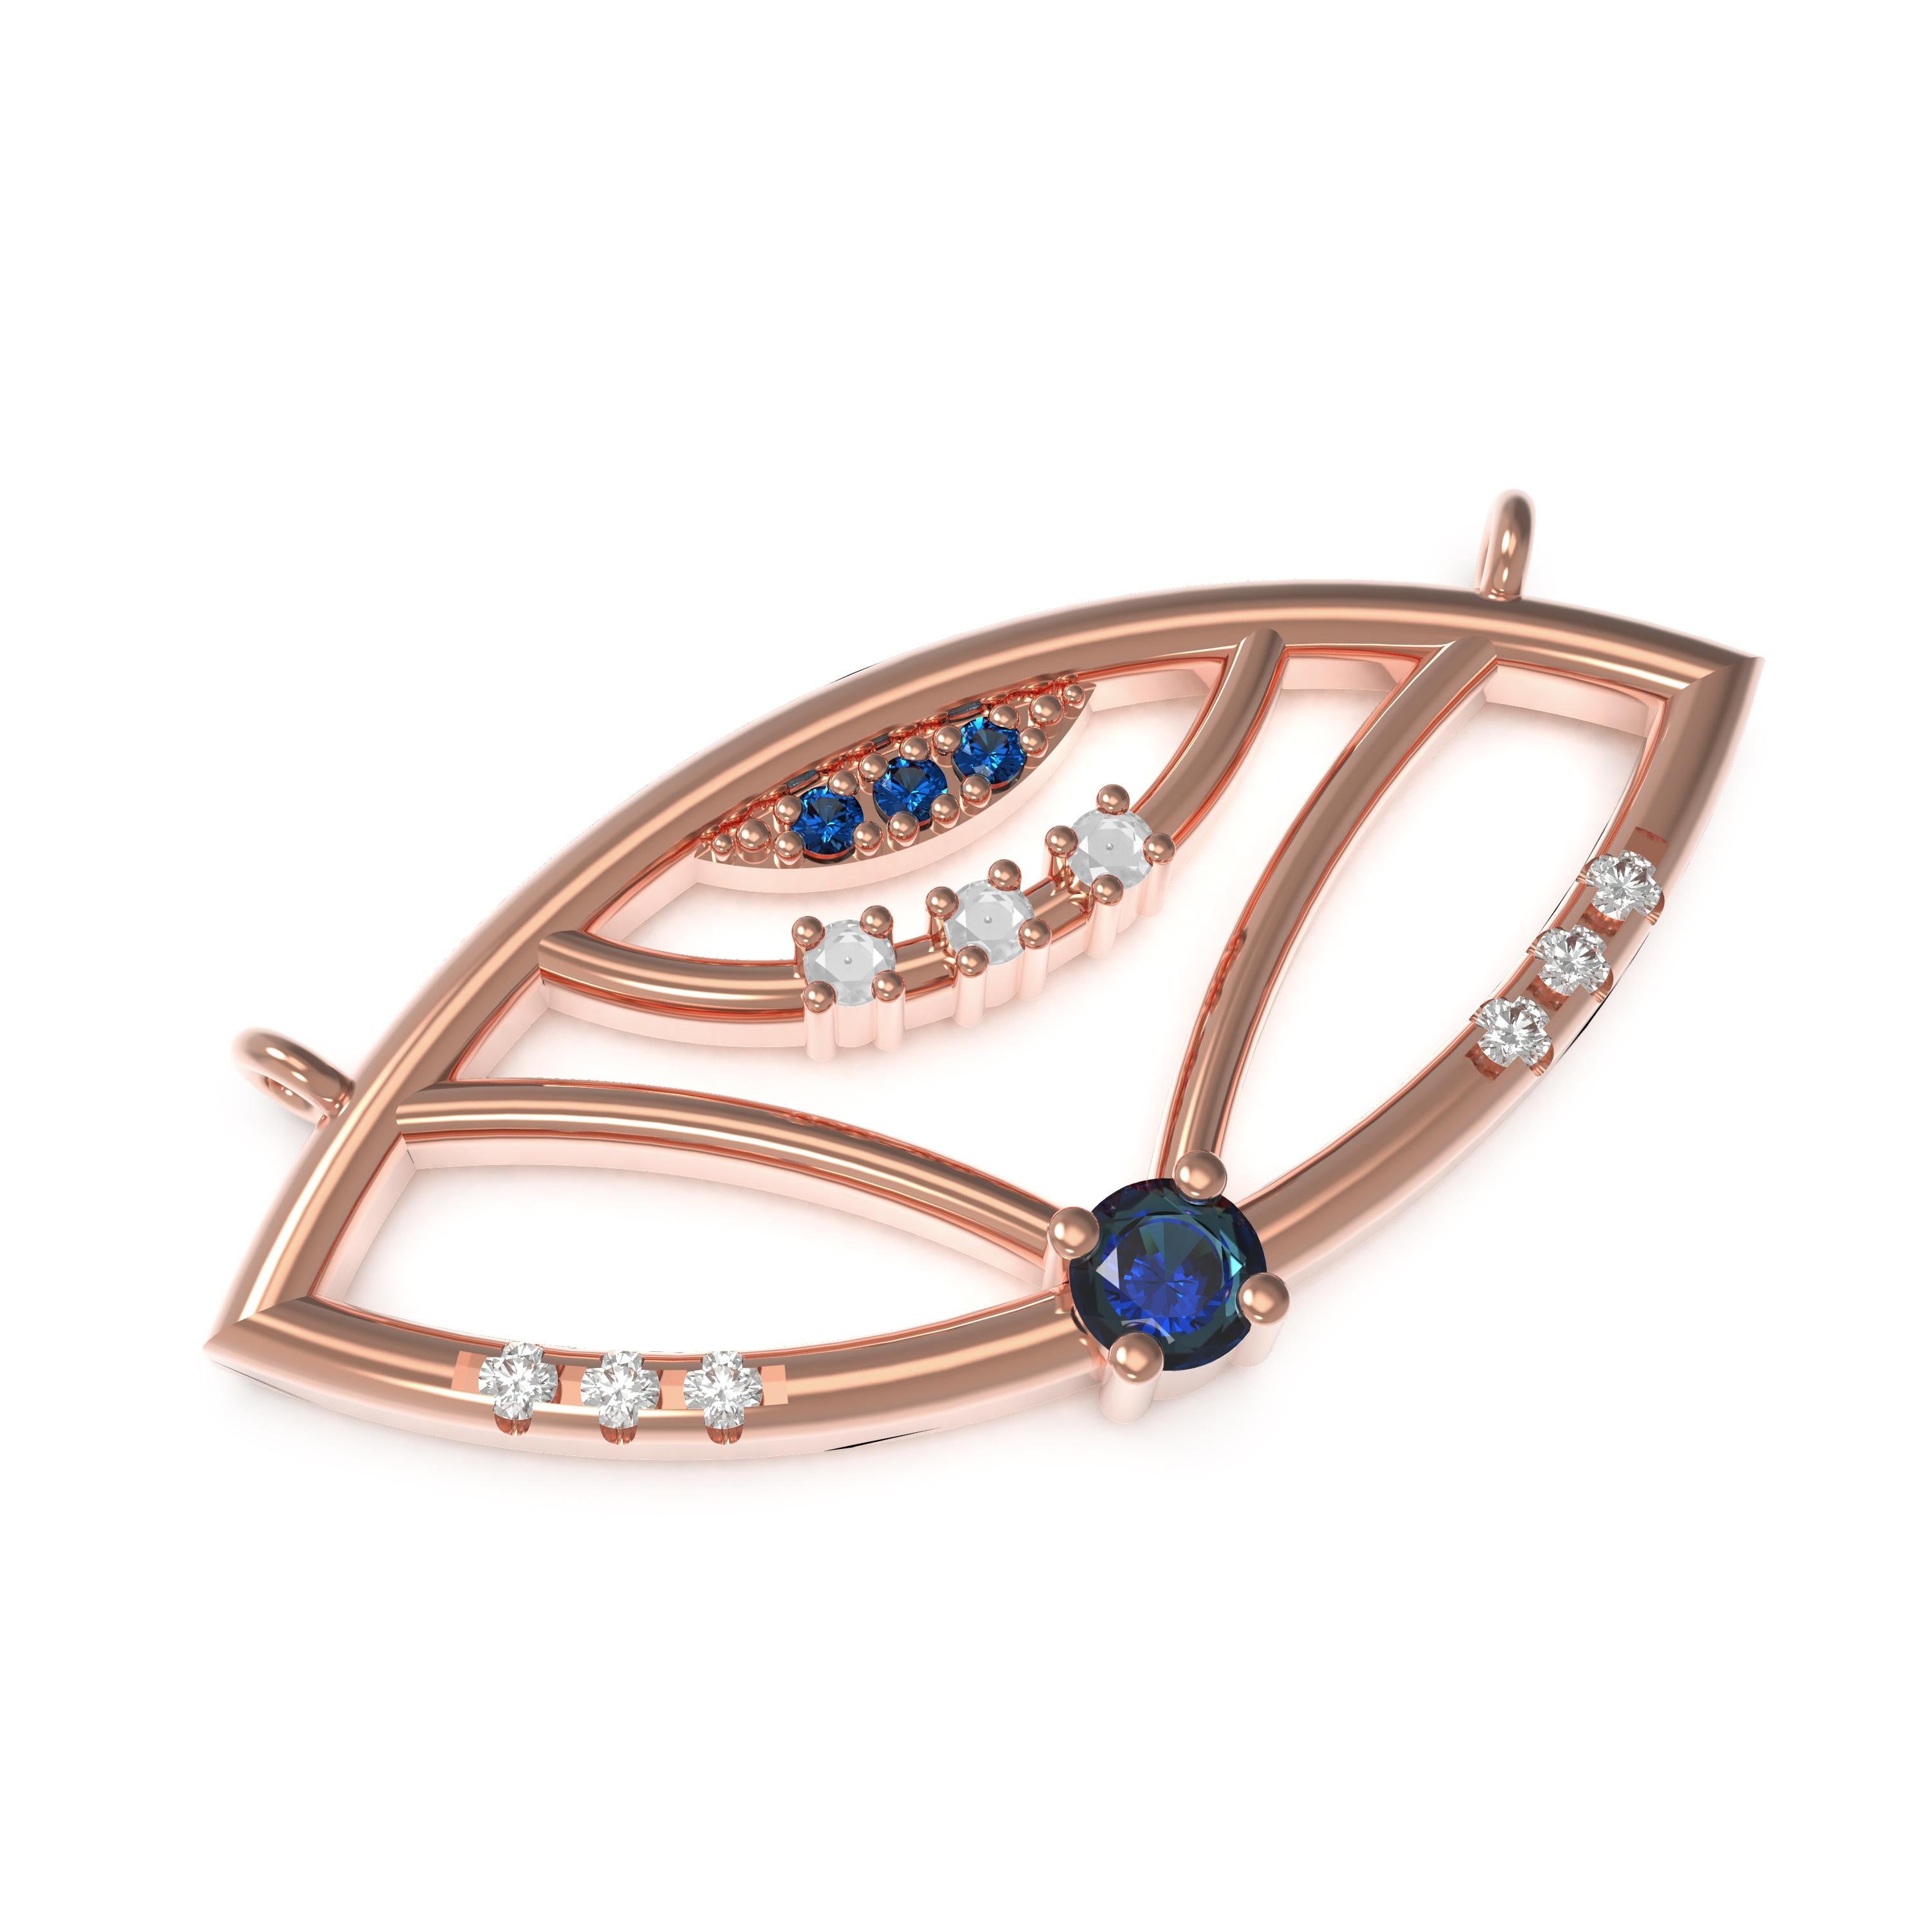 Designer: Alexia Gryllaki
Dimensions: motif 23x11mm, chain 450mm
Weight: approximately 3.6g 
Barcode: ING010P

The Interlocking Geometry pendant in 18 karat rose gold with sapphires approx. 0.12cts and round brilliant-cut diamonds approx.